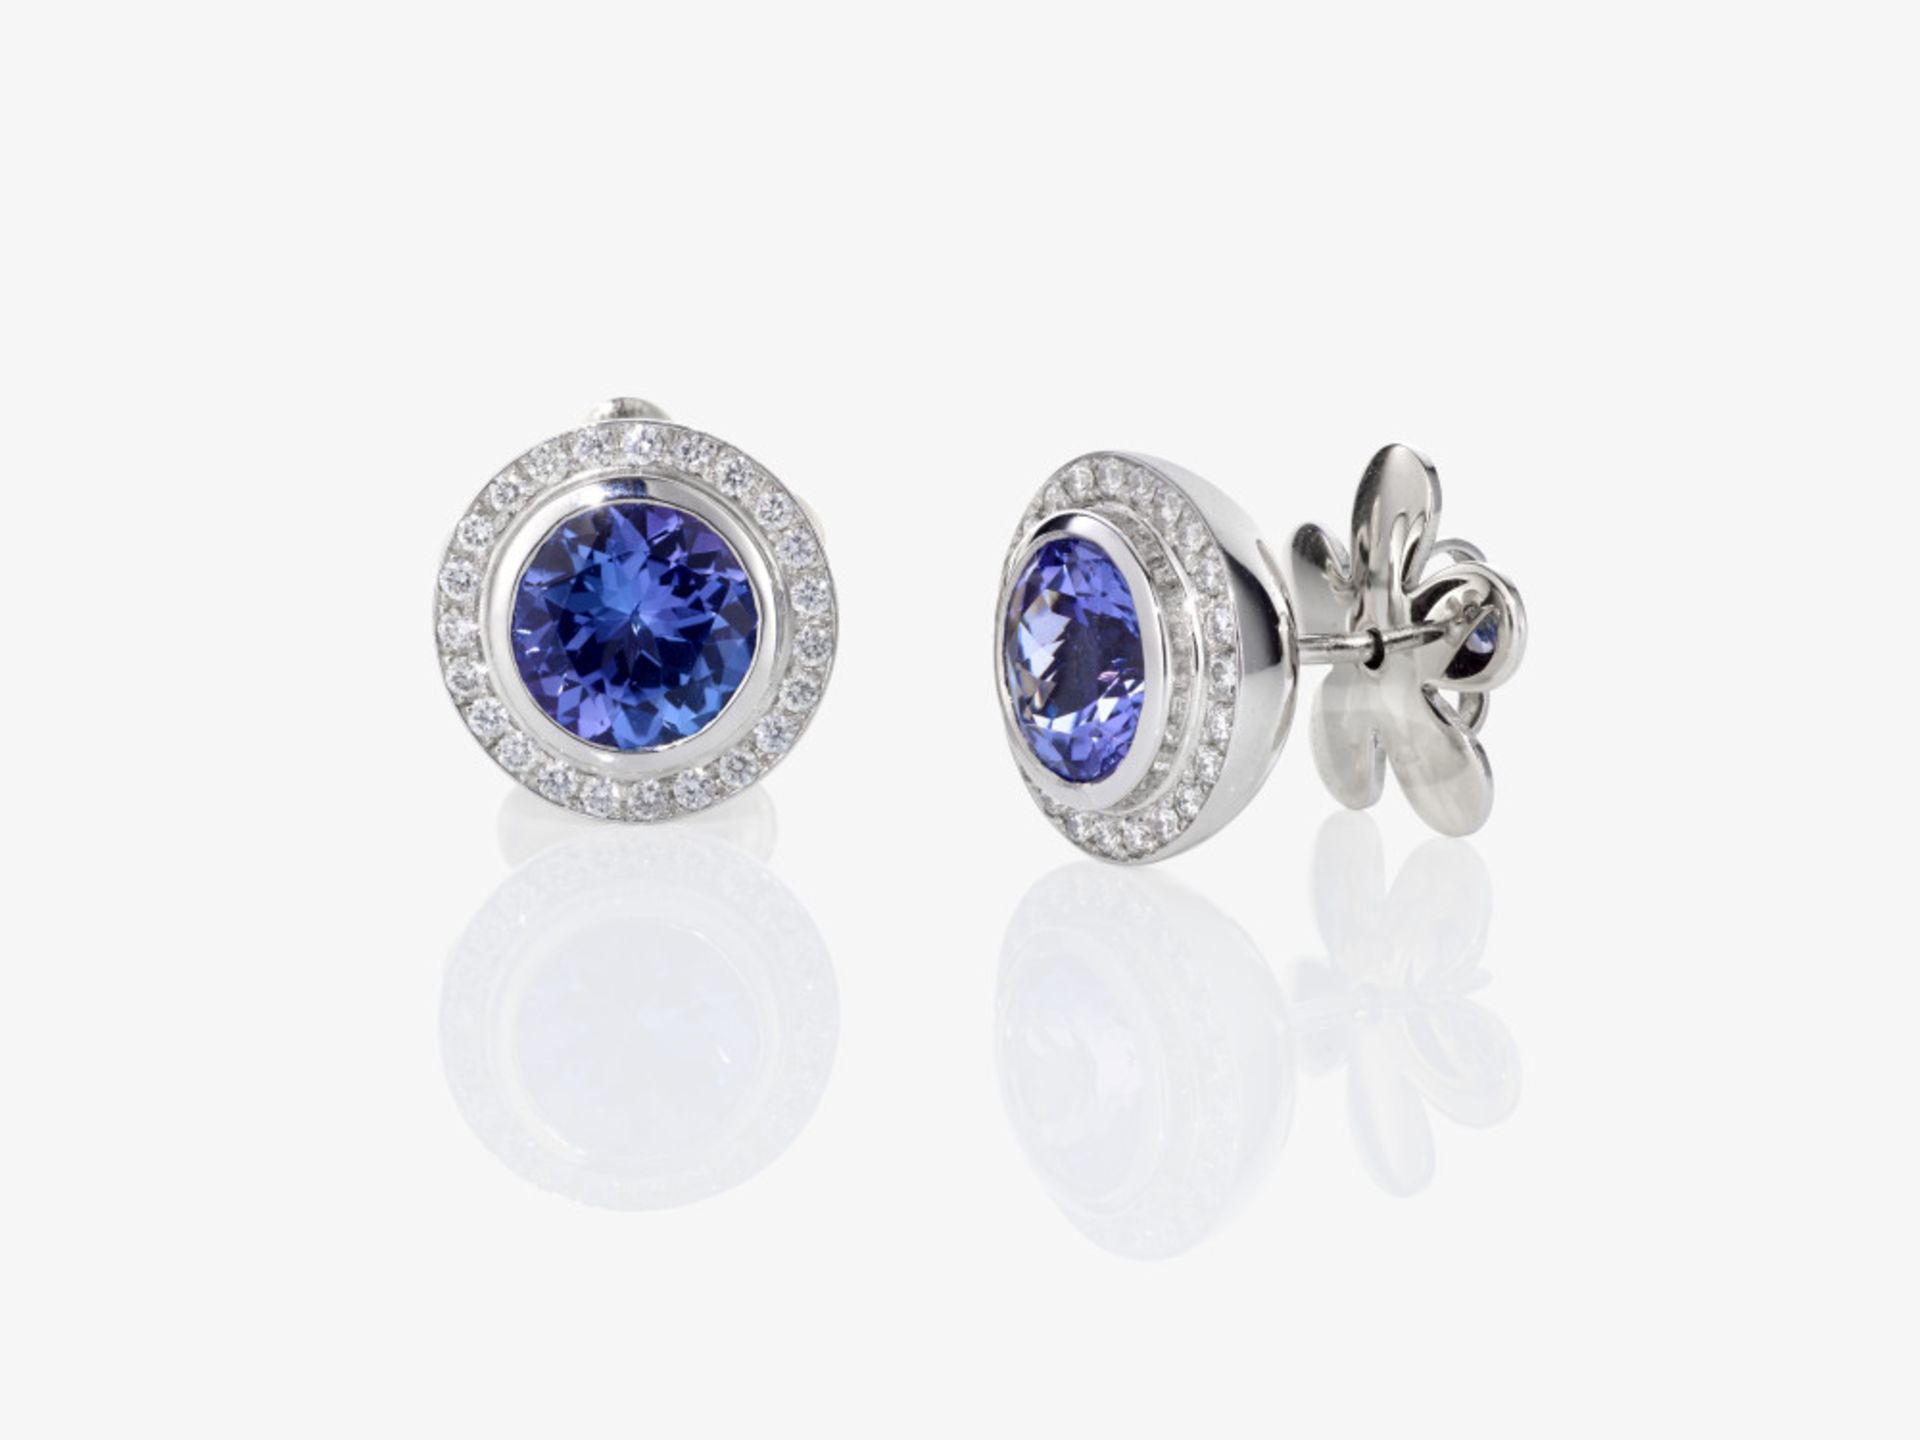 A pair of stud earrings decorated with tanzanites and brilliant-cut diamonds - Germany